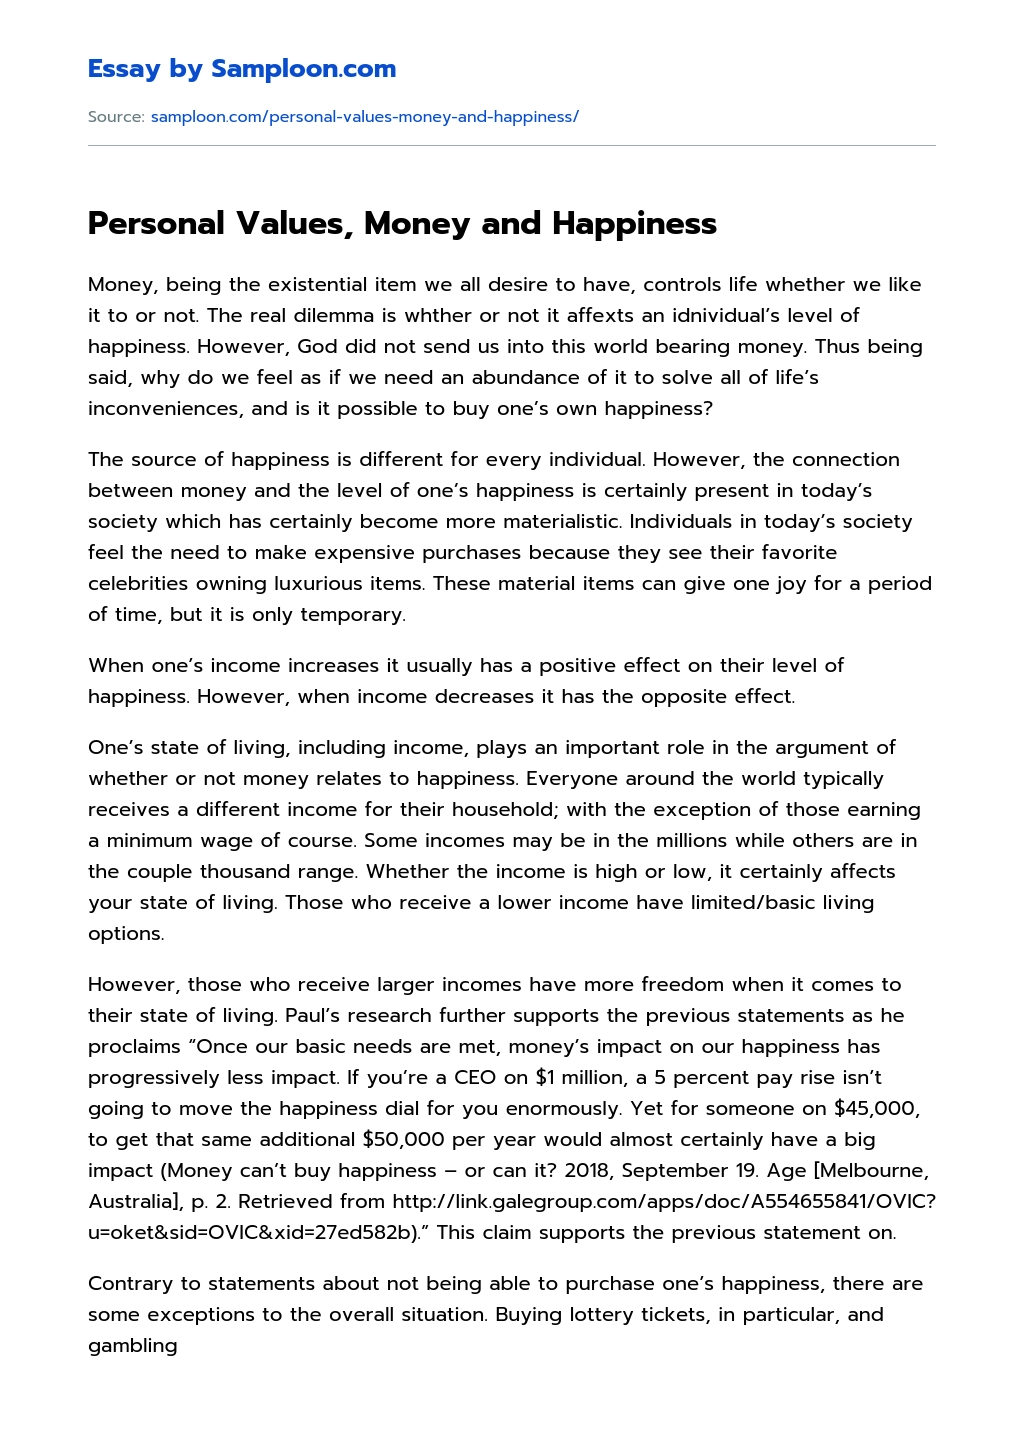 Personal Values, Money and Happiness essay